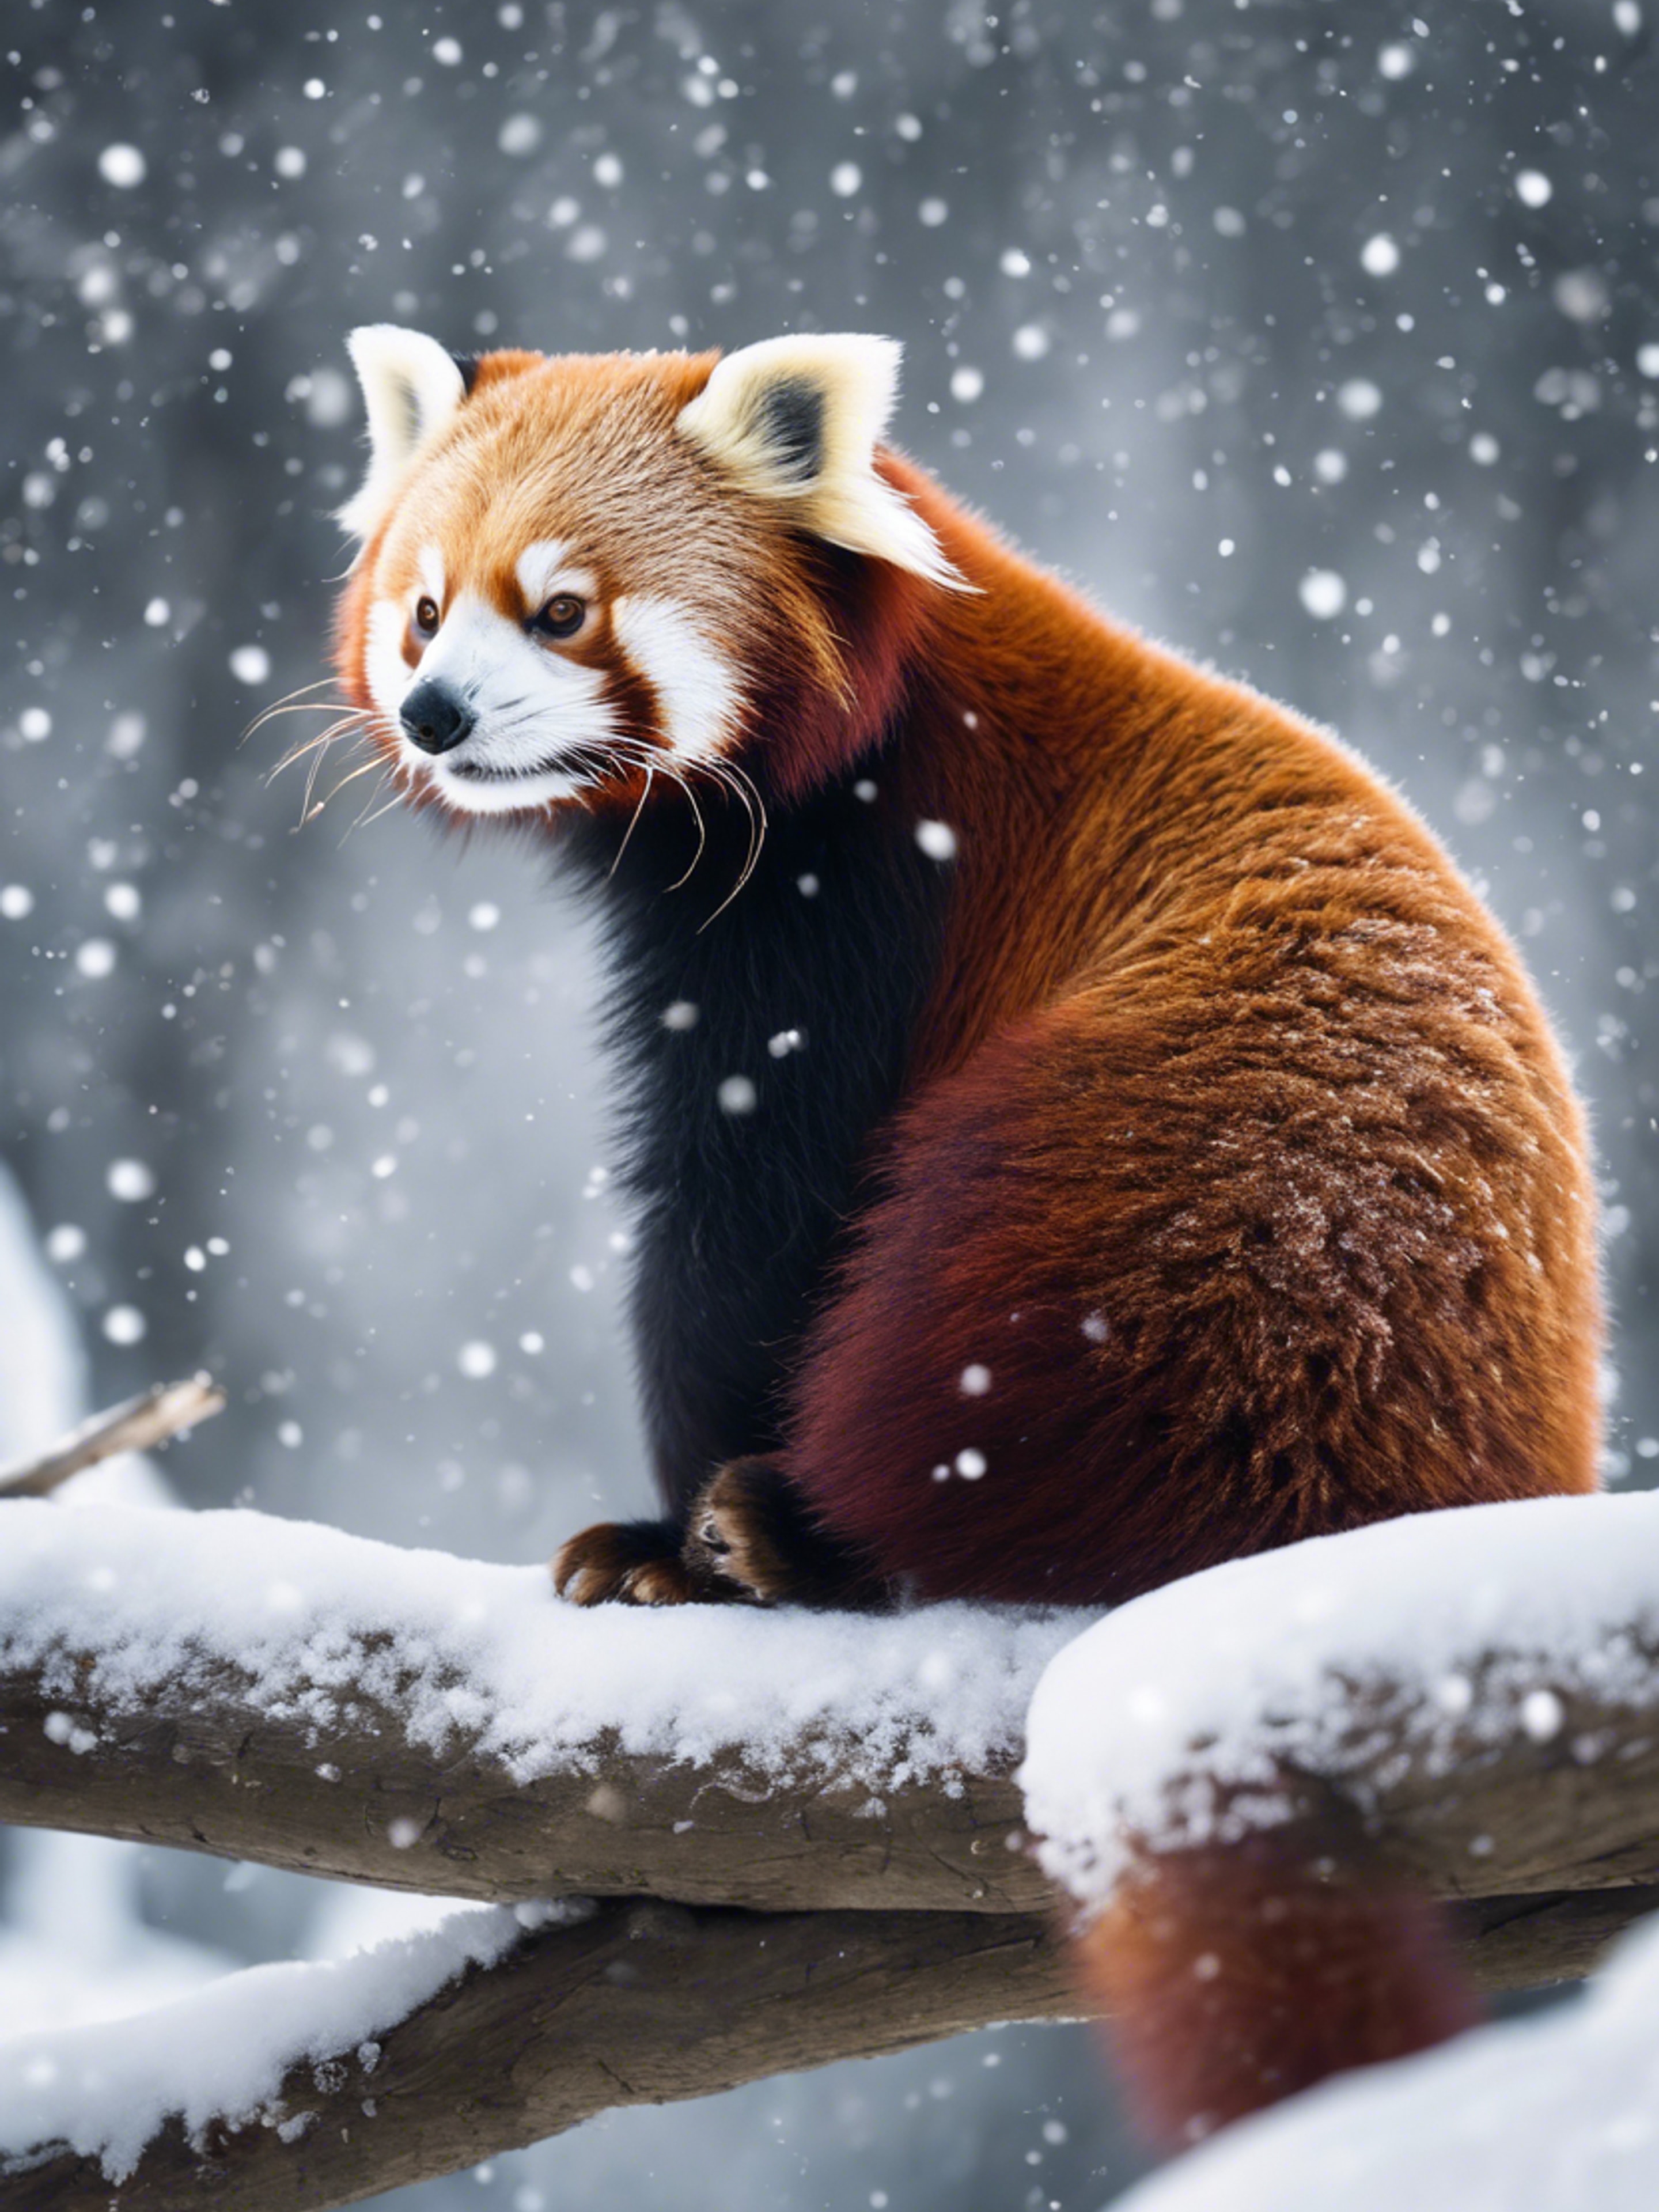 A red panda in winter, its fur looking extra striking against the snow. Papel de parede[00977545189243e2b3f0]